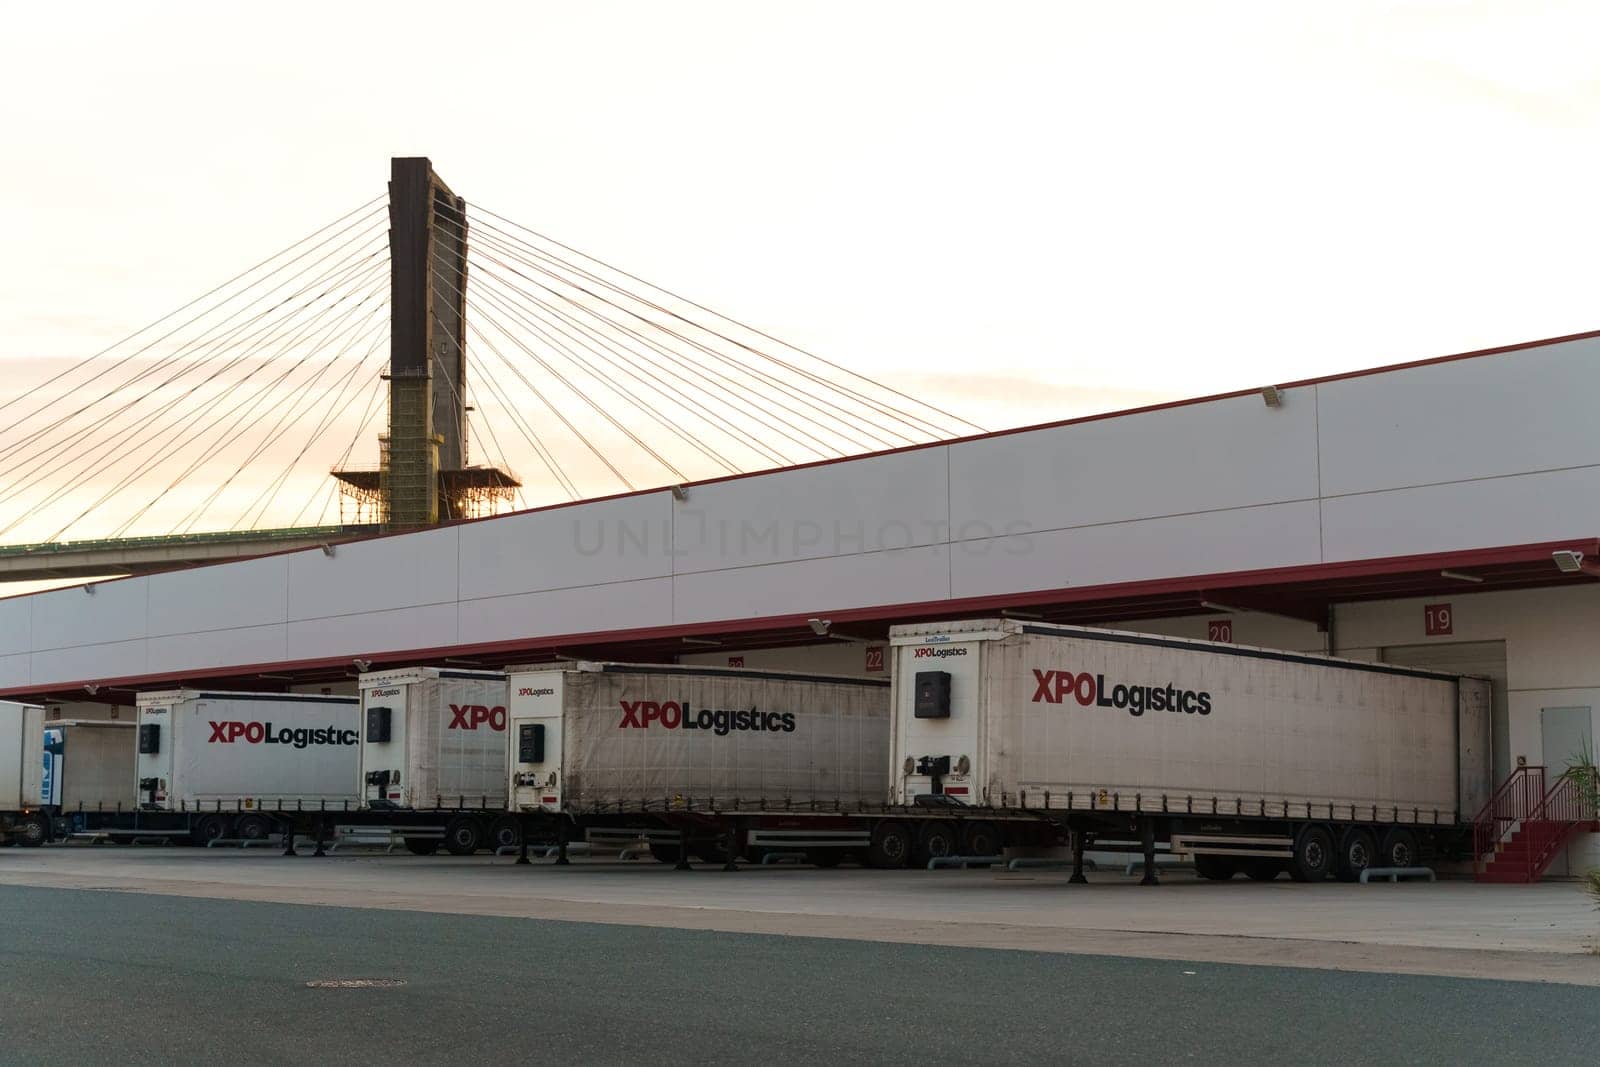 Seville, Spain - June 1, 2023: Several XPO Logistics trailers parked at a loading dock with a cable-stayed bridge in the background, captured at dusk.